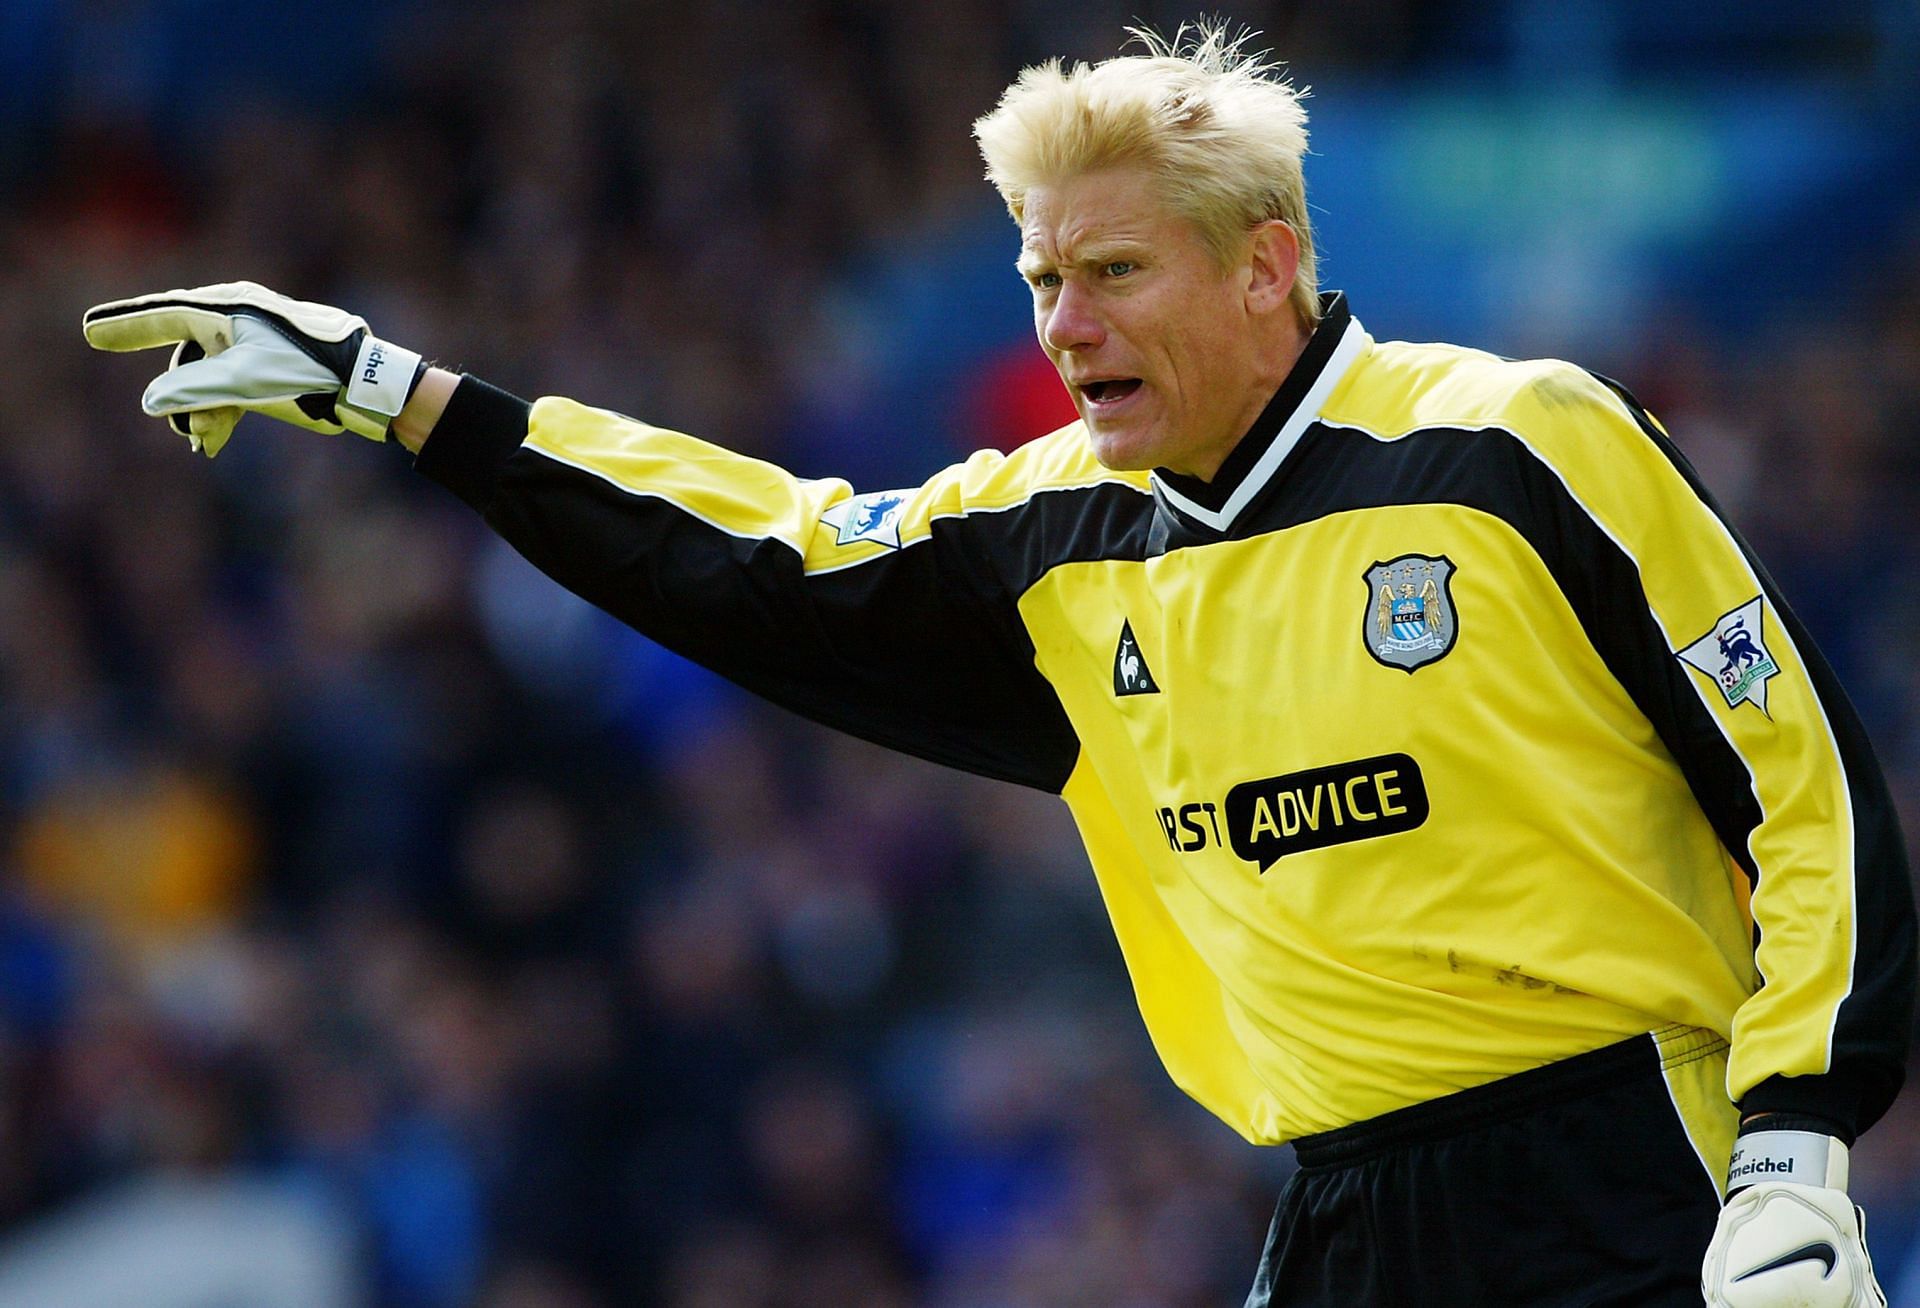 Peter Schmeichel ended his glorious career at Man City